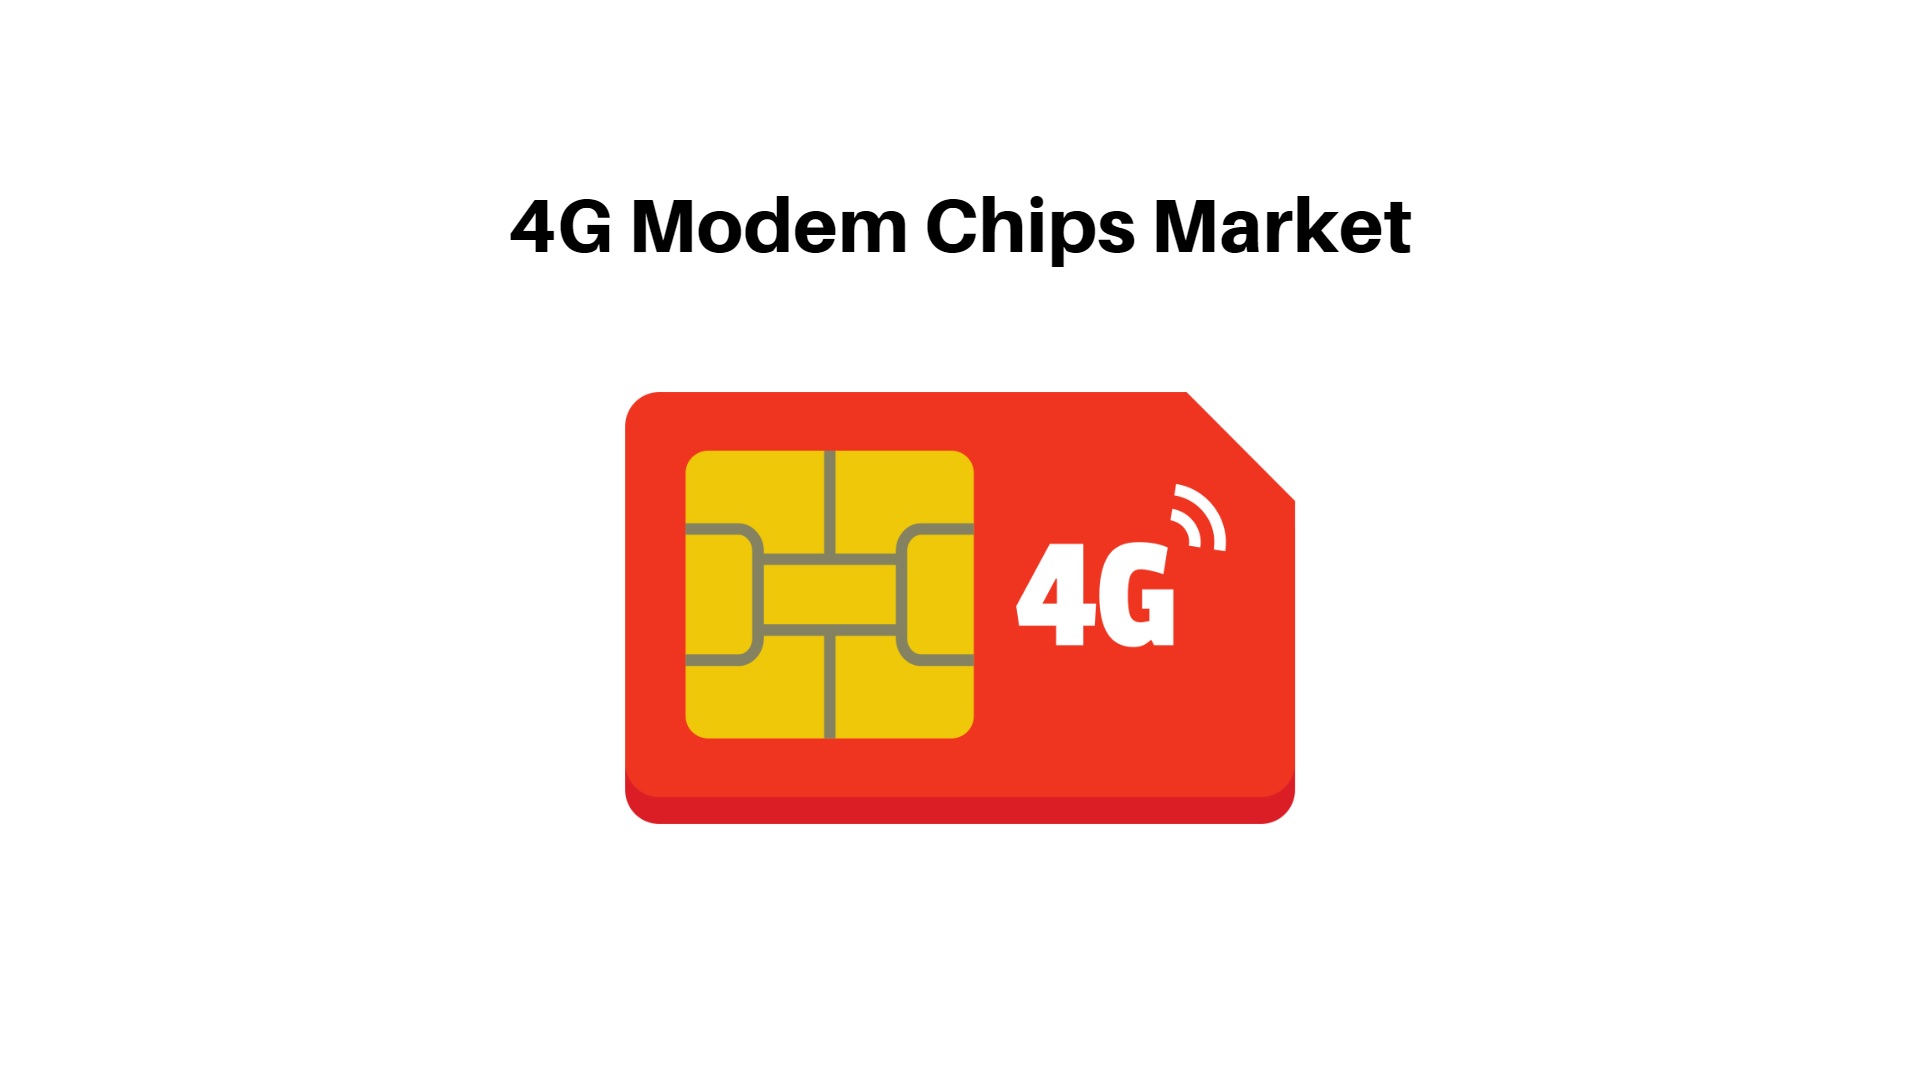 4G Modem Chips Market To Develop Strongly And Cross USD 13.7 Billion By 2032